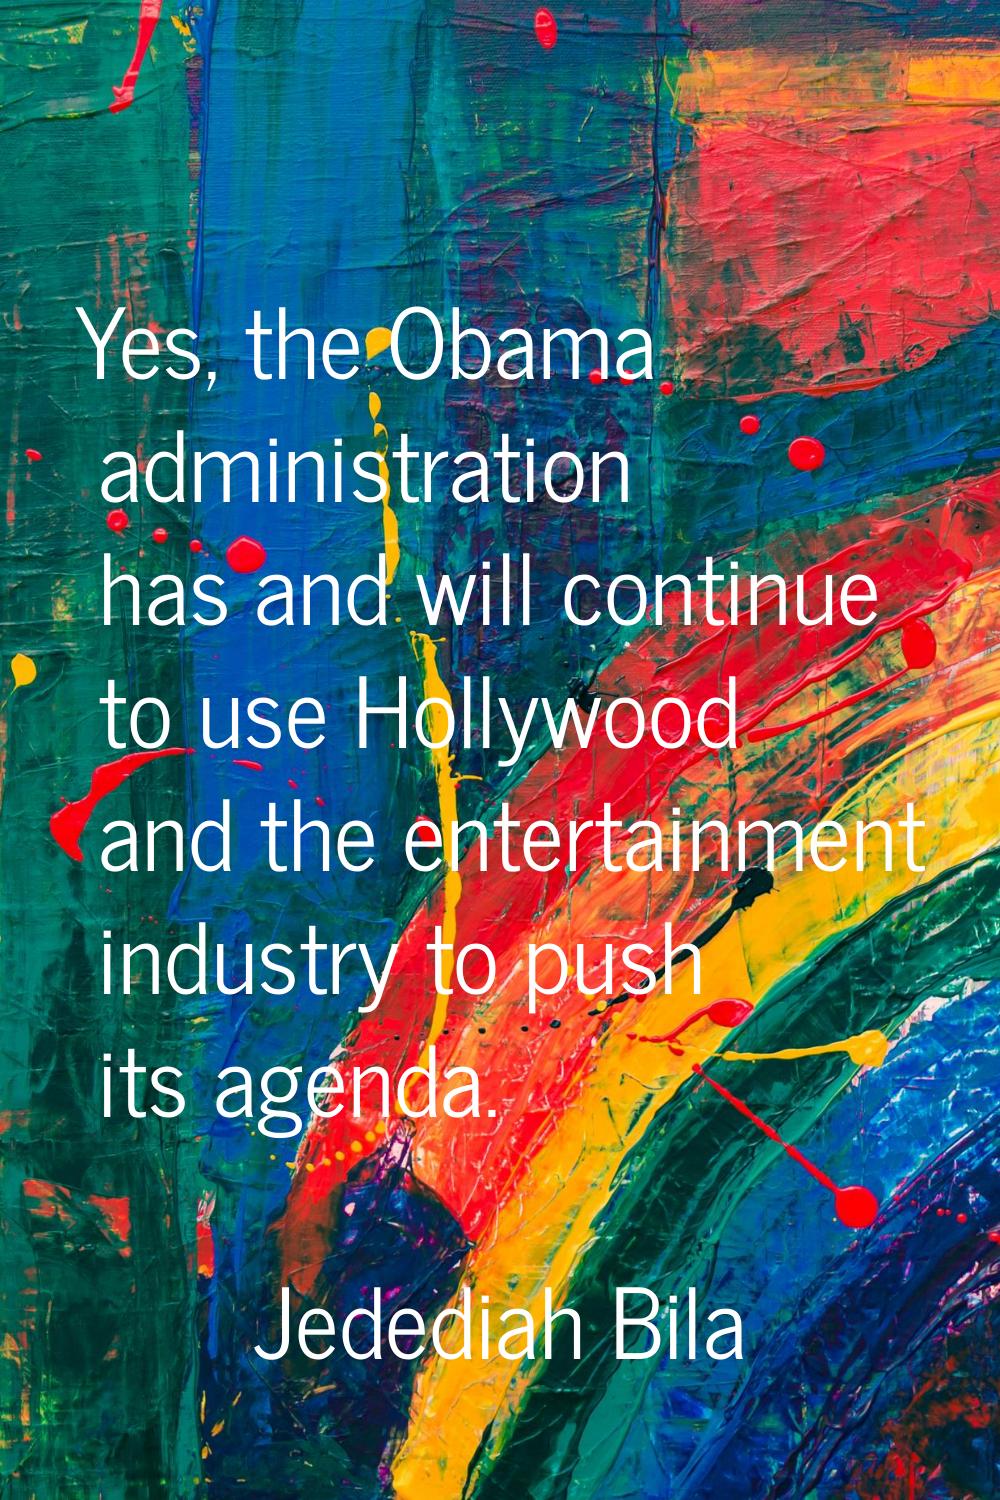 Yes, the Obama administration has and will continue to use Hollywood and the entertainment industry